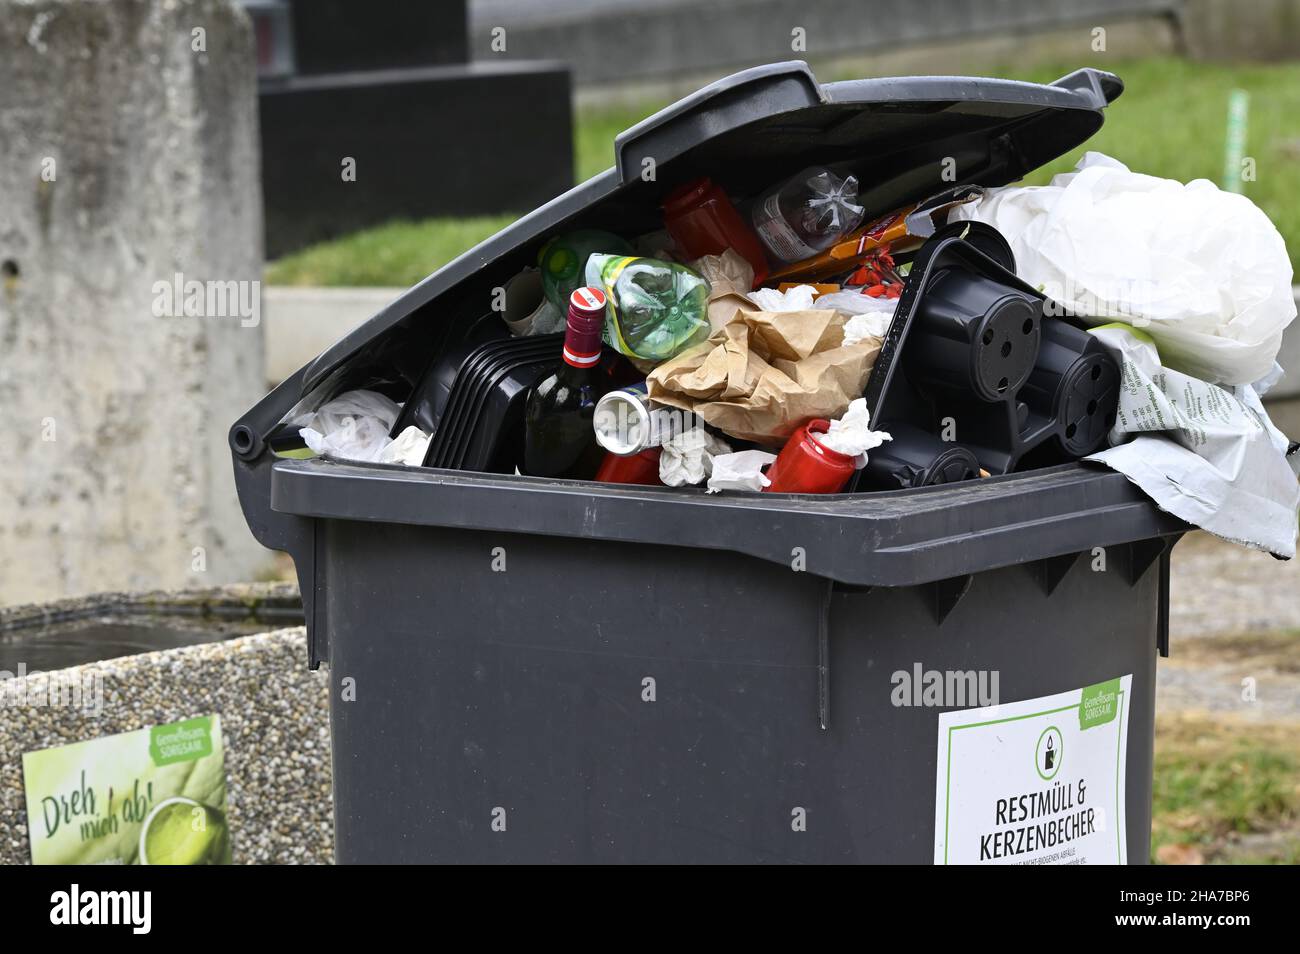 https://c8.alamy.com/comp/2HA7BP6/vienna-austria-the-central-cemetery-in-vienna-residual-waste-container-at-the-central-cemetery-2HA7BP6.jpg